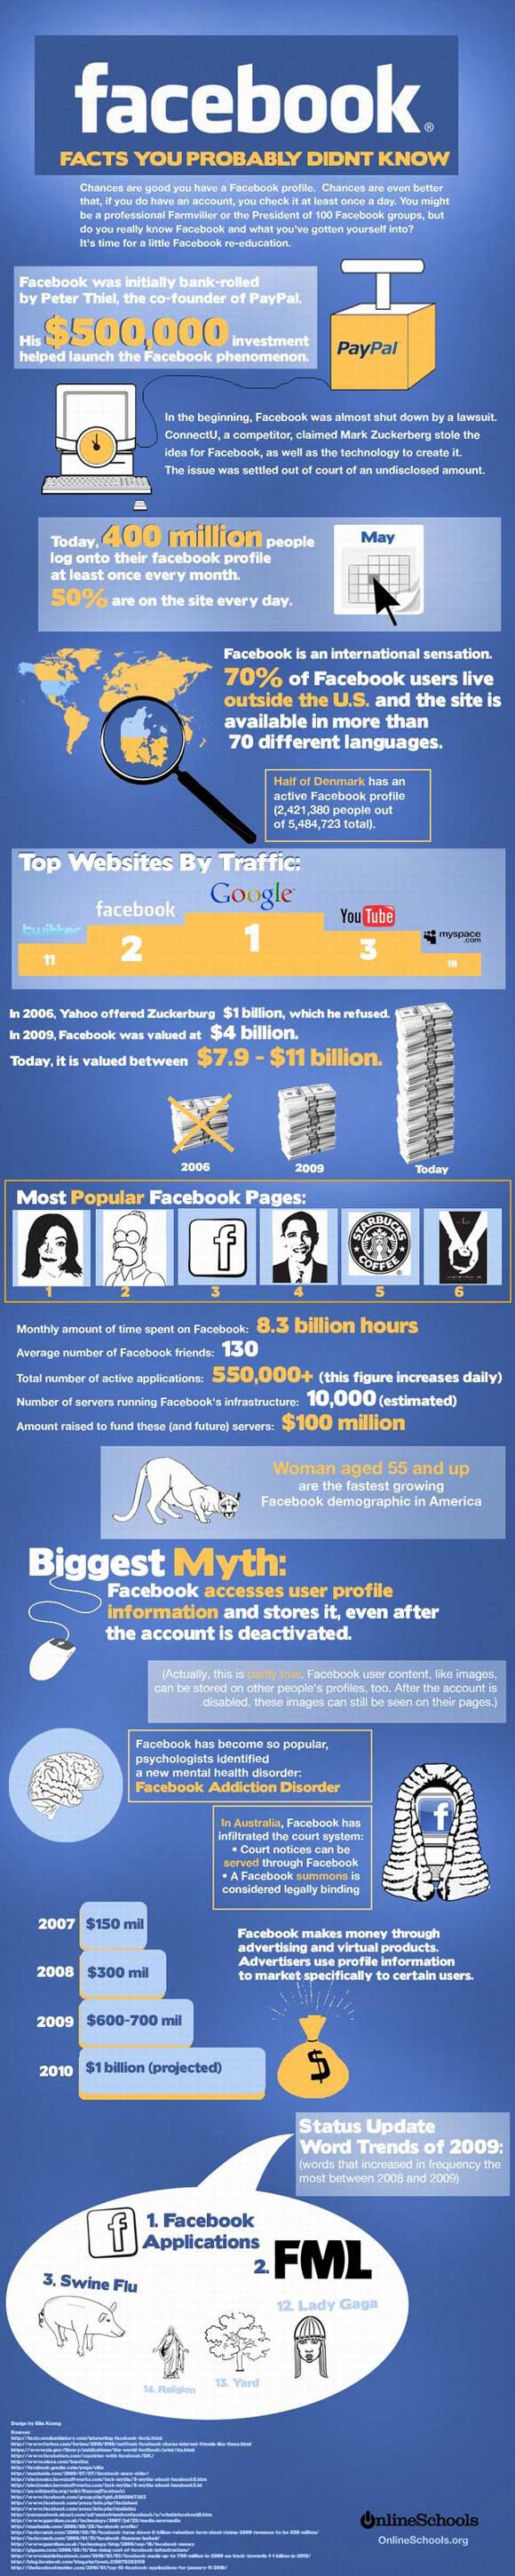 A feast of fascinating Facebook facts, just for you